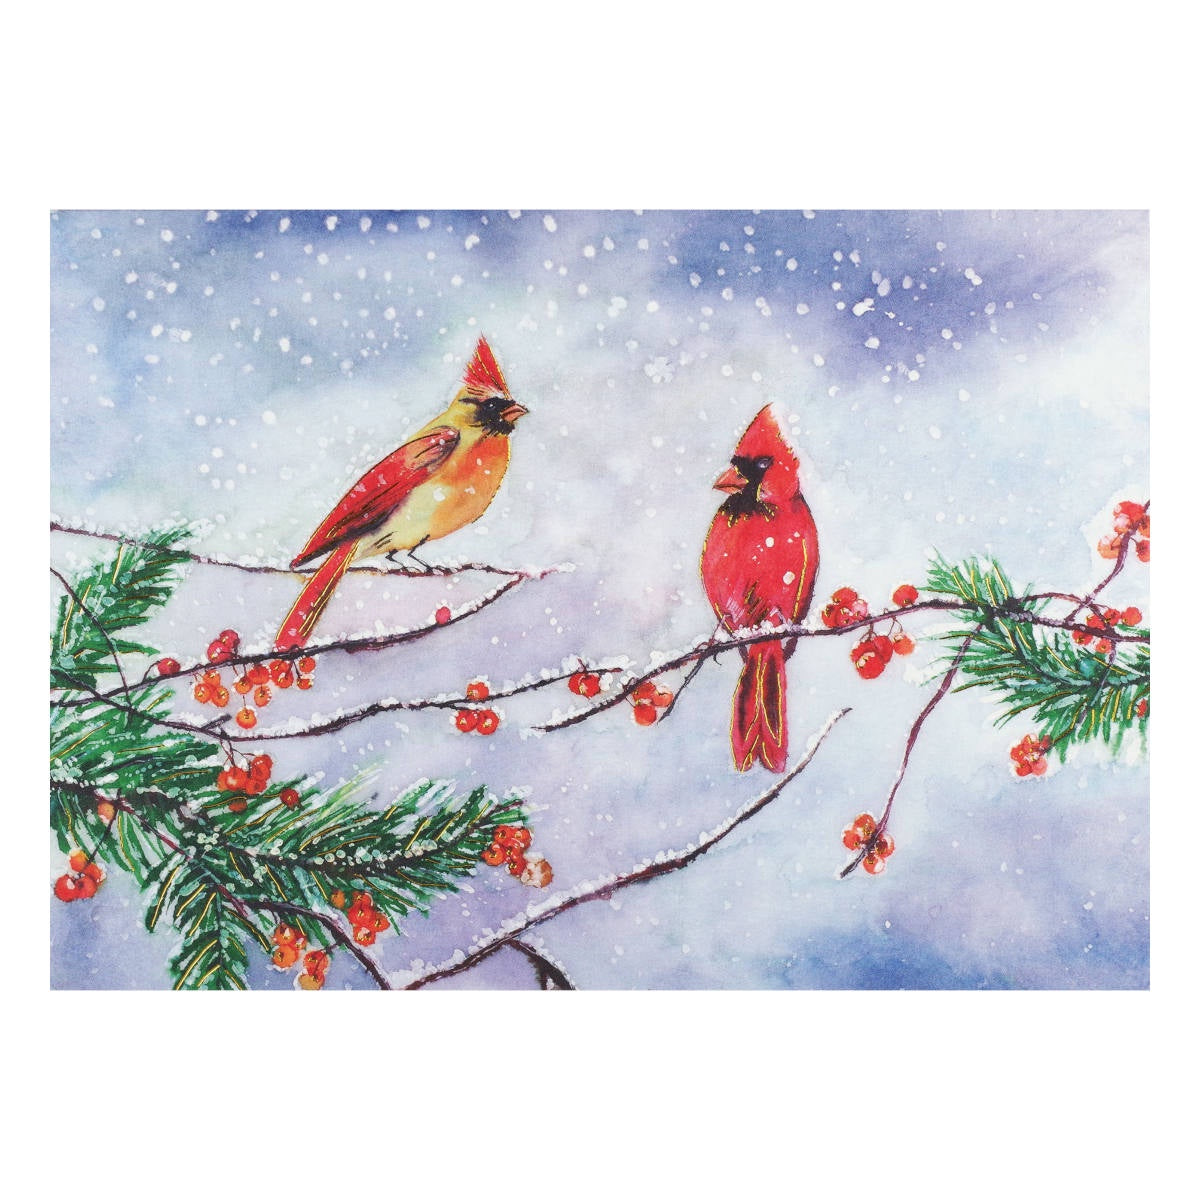 Deluxe Boxed Christmas Cards - Cardinals and Berries